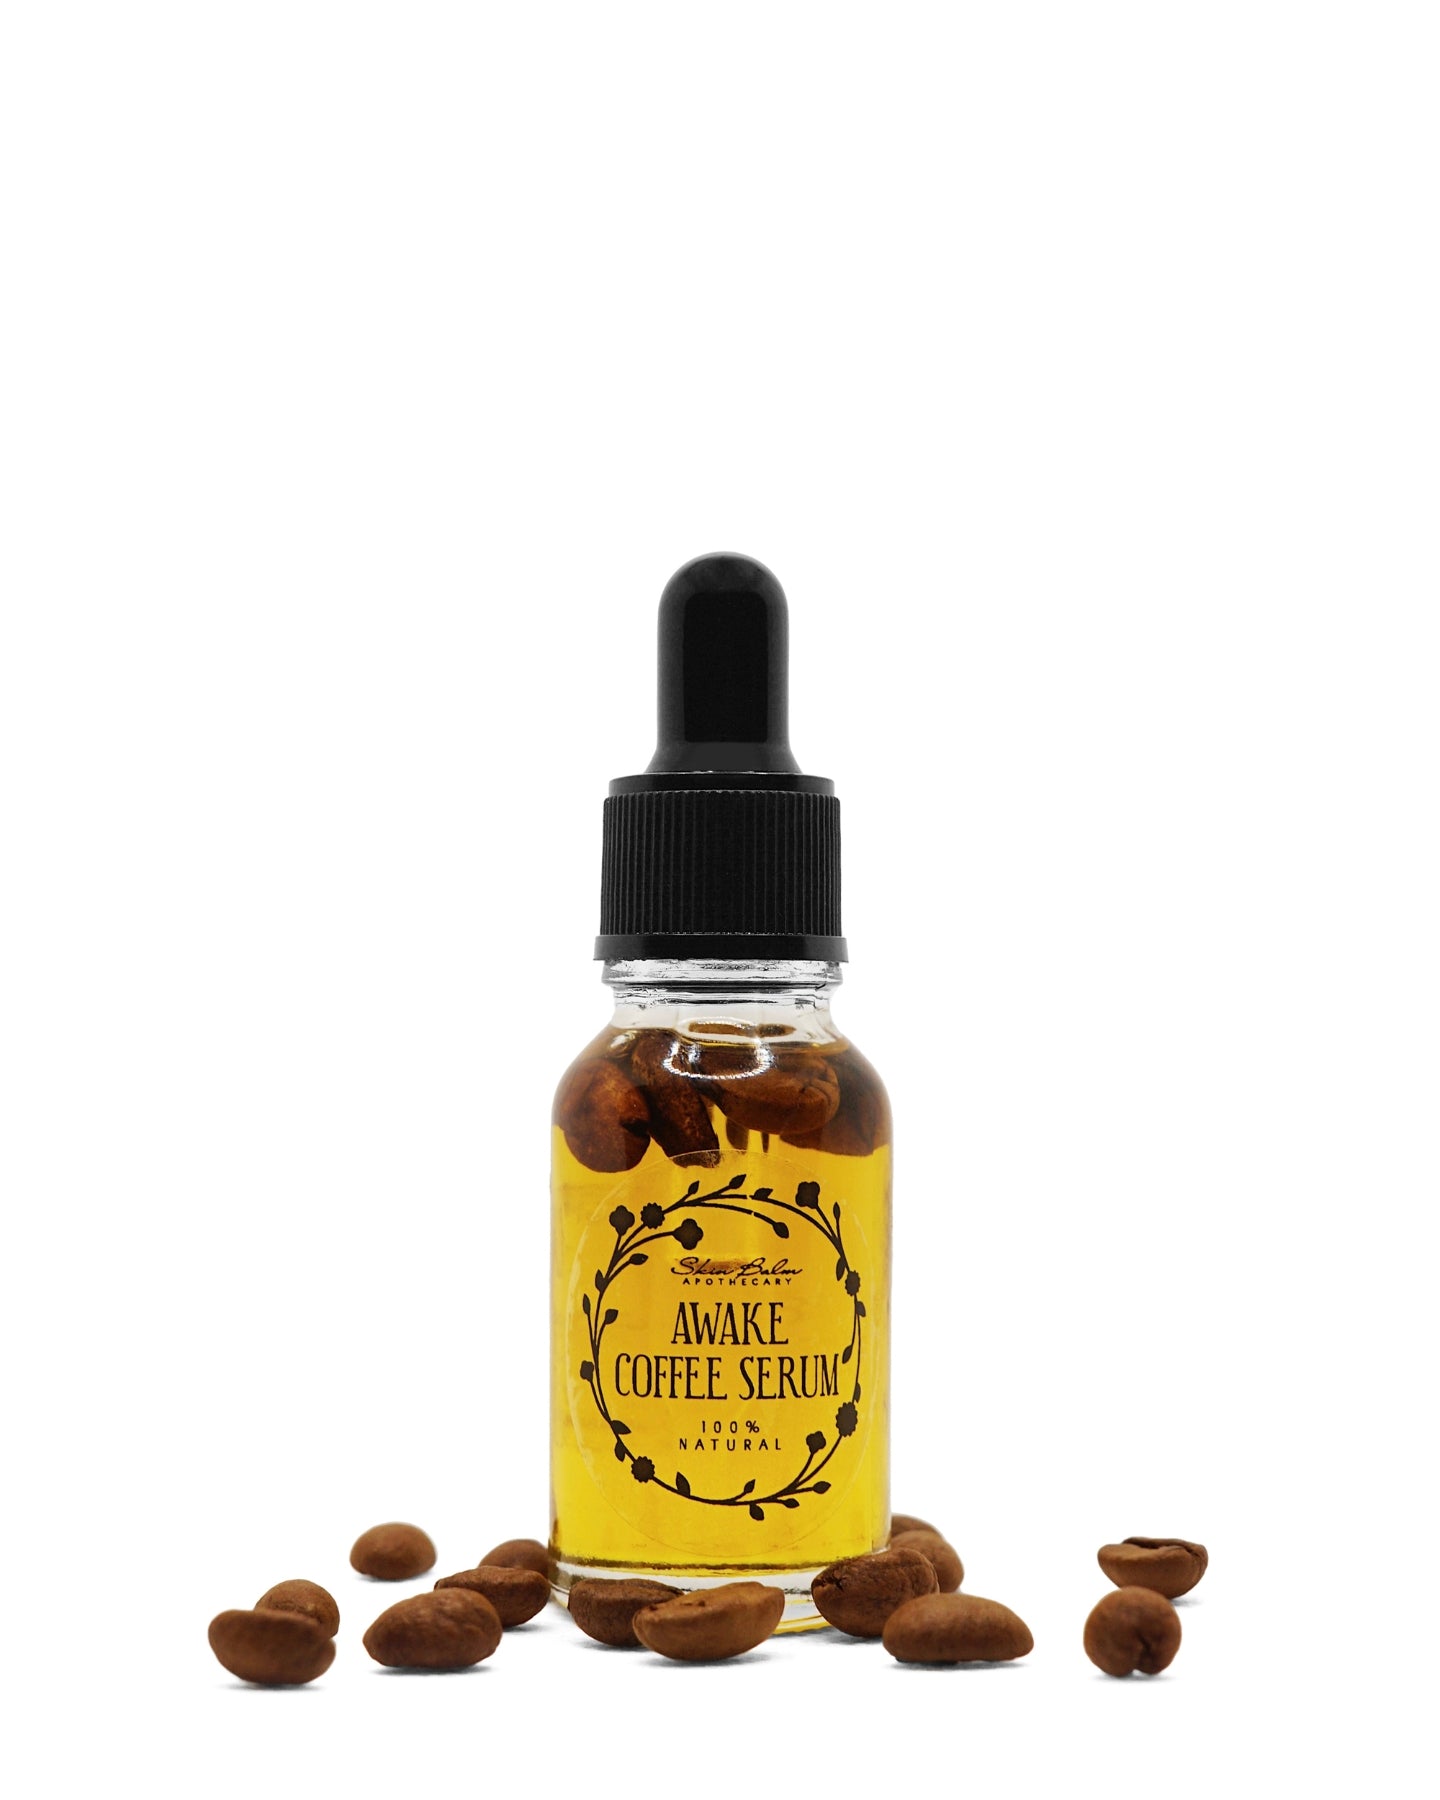 Awake Coffee Serum surrounded by coffee beans against a white background.